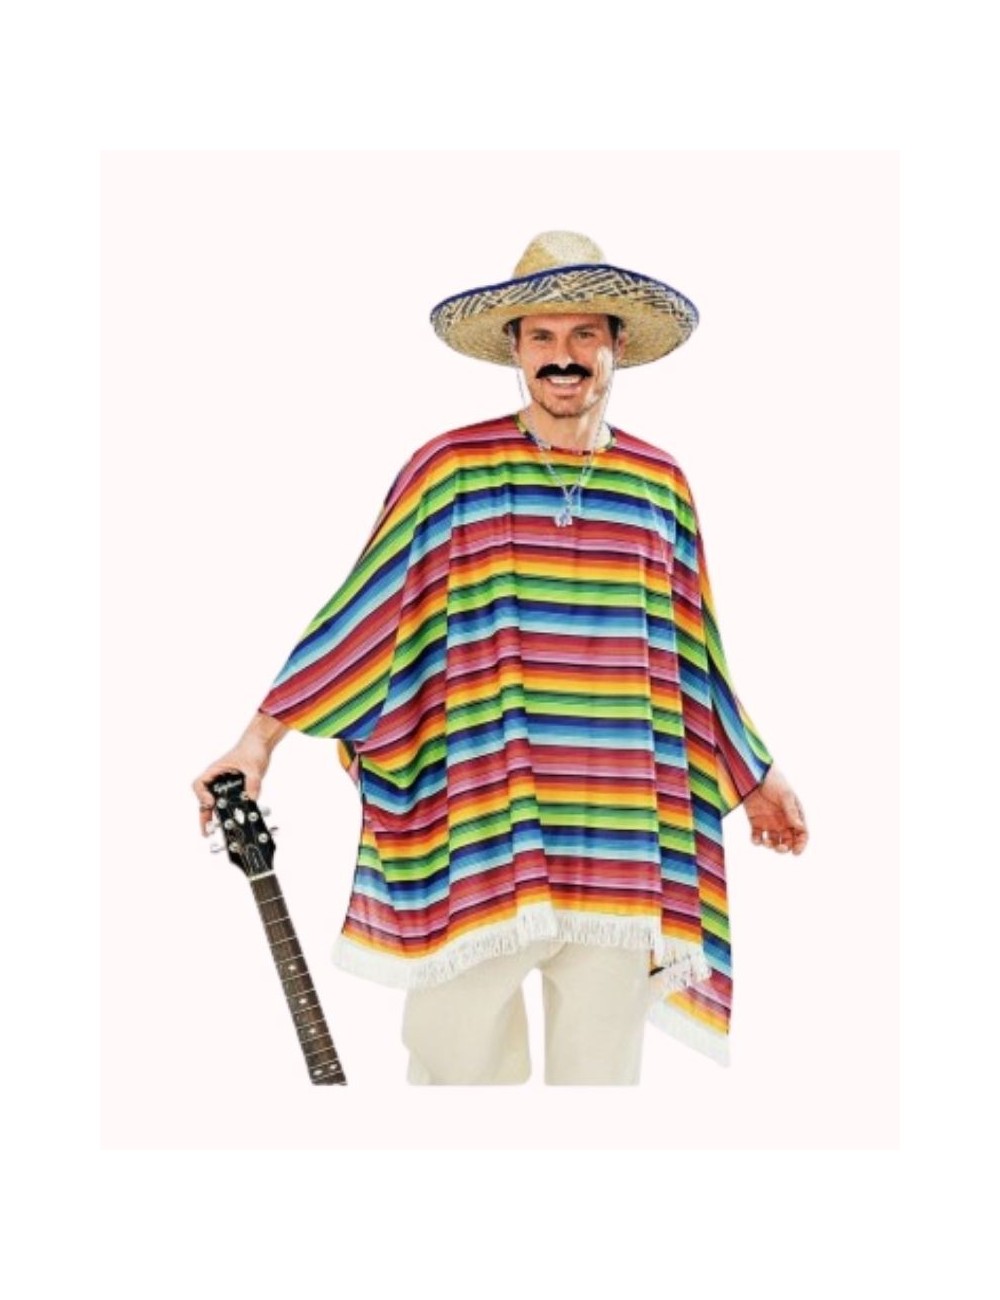 Poncho and Mexican hat